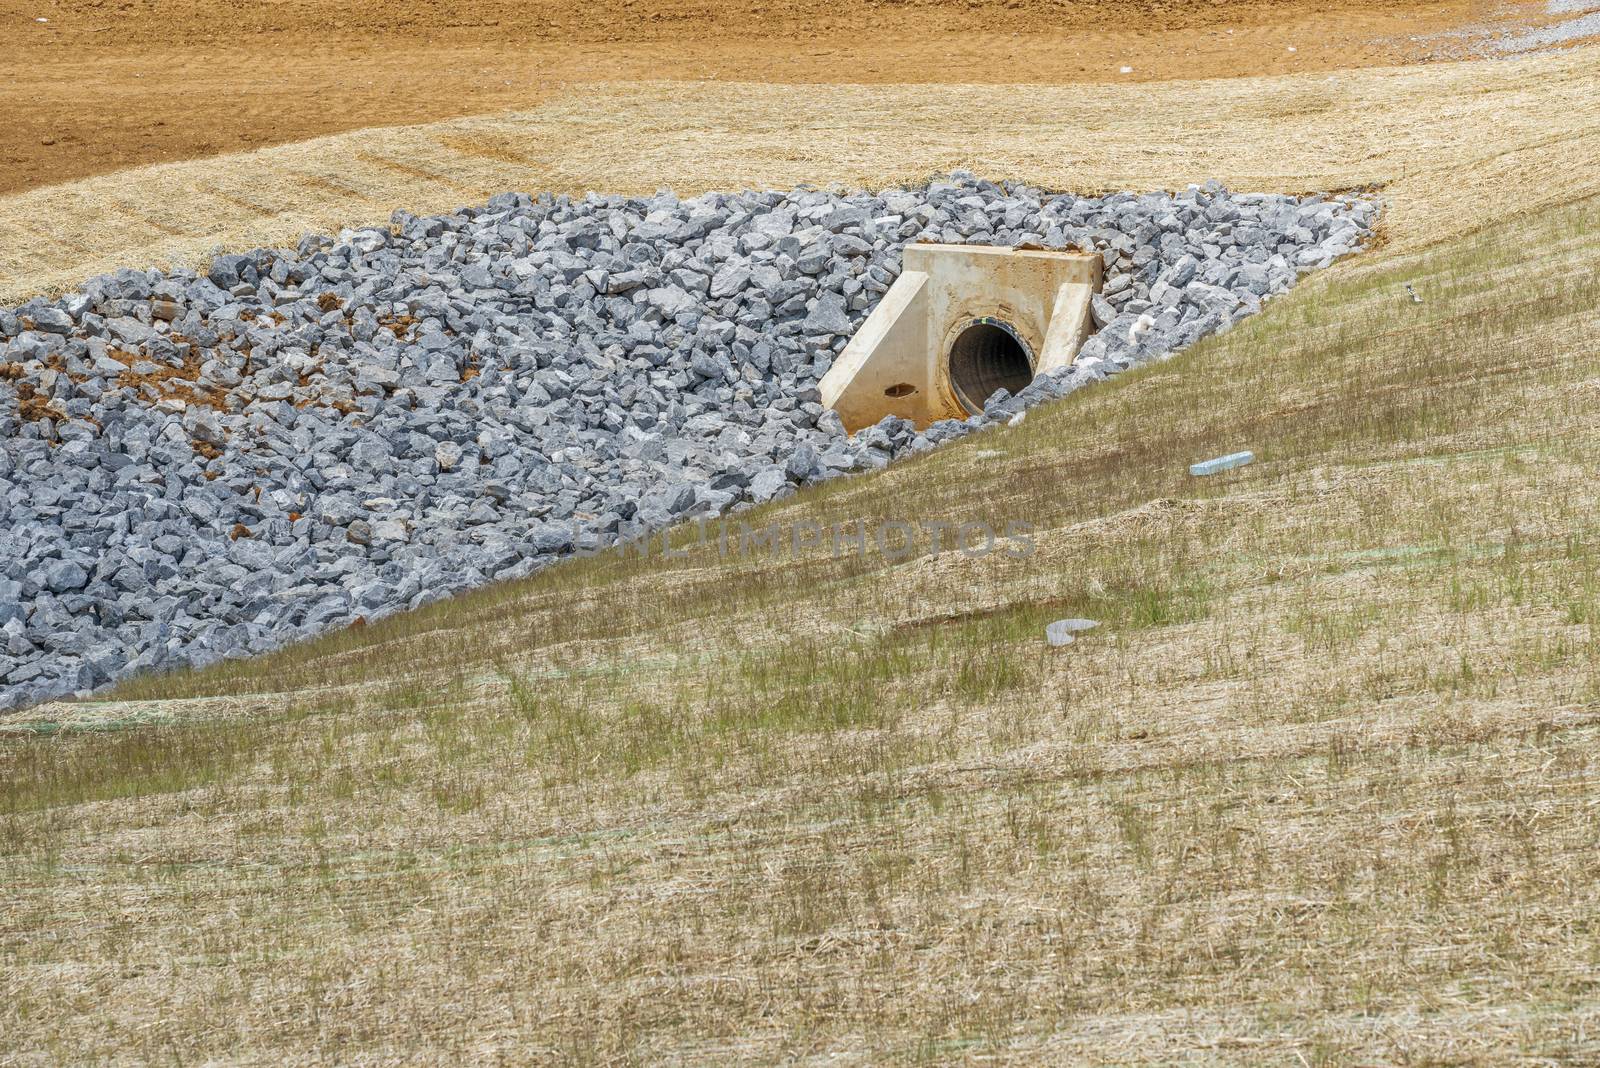 Culvert and Drainage Ditch Under Construction by stockbuster1